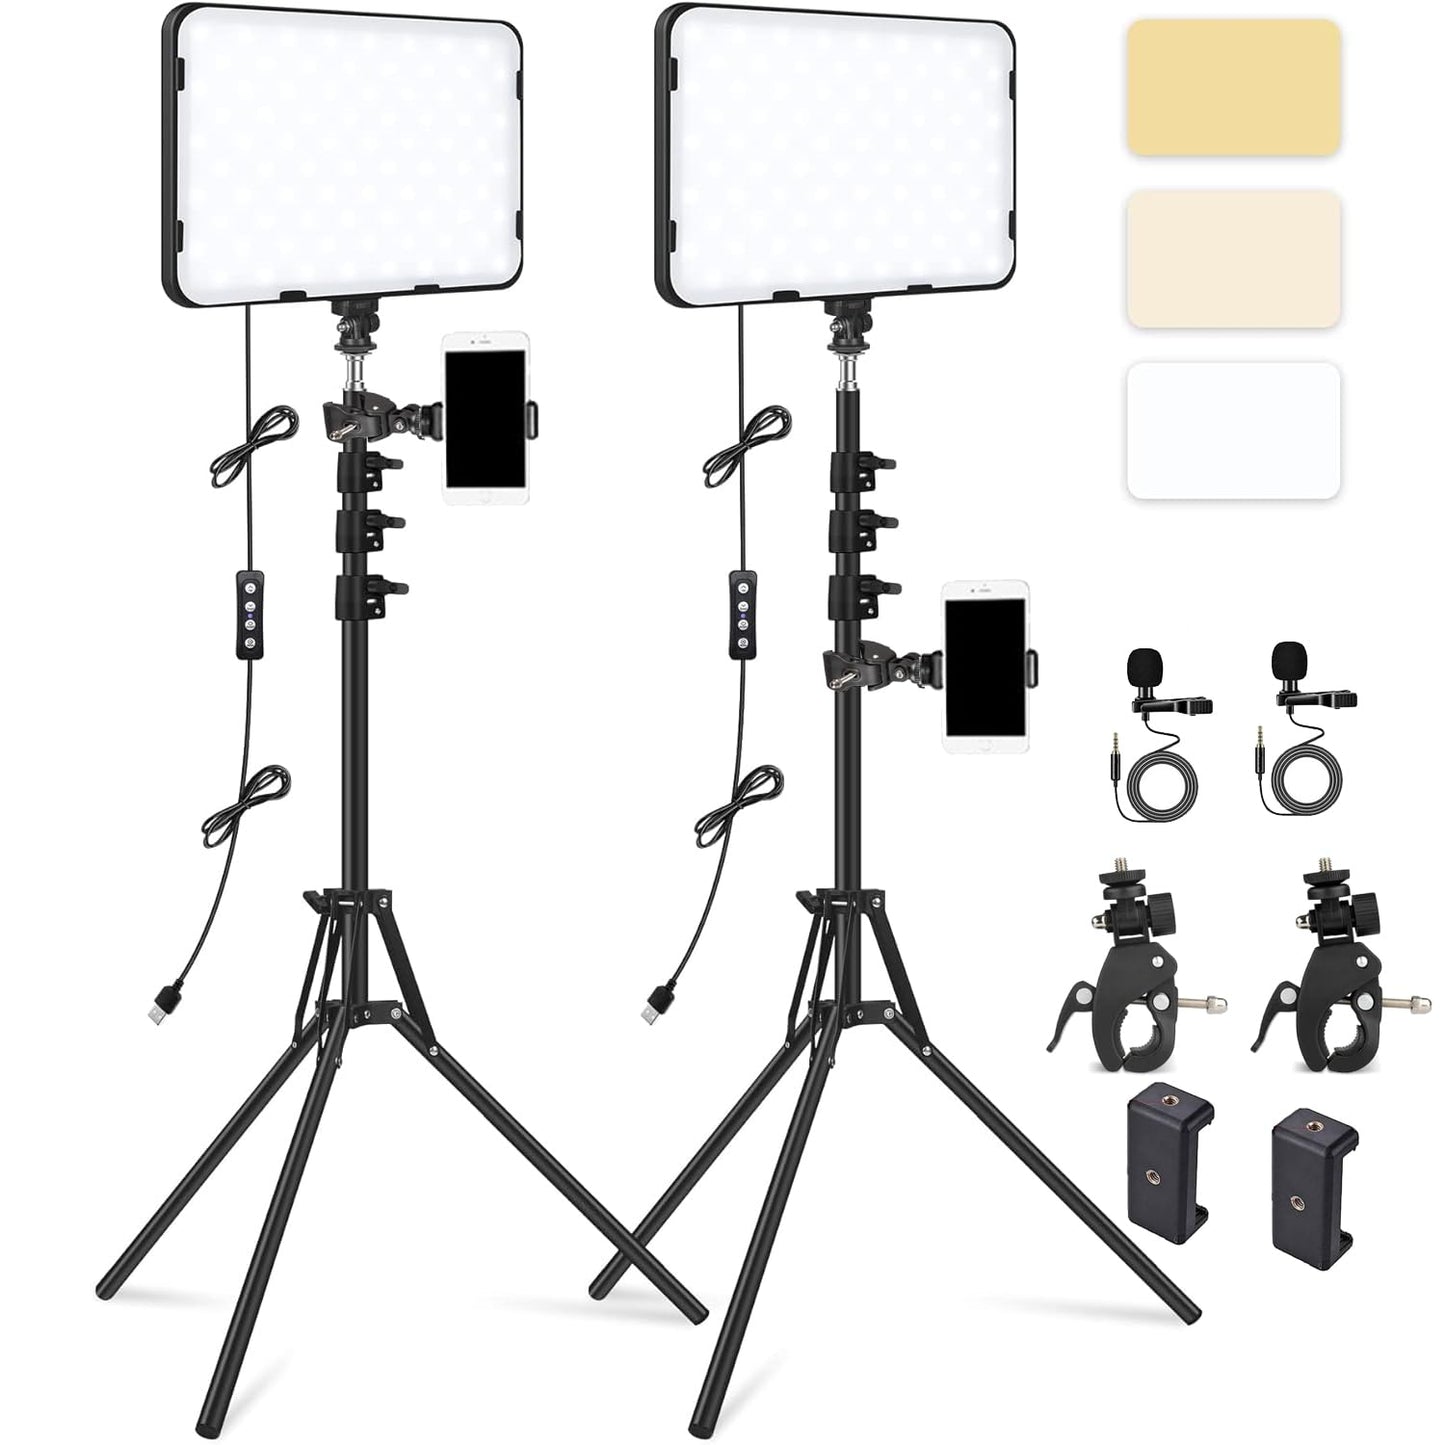 ADZOY 2-Pack Professional Combo of 10 Inch USB Powered LED Panel Light with 7 Feet Adjustable Metal Tripod, Super Clamp and Collar Lapel Microphone